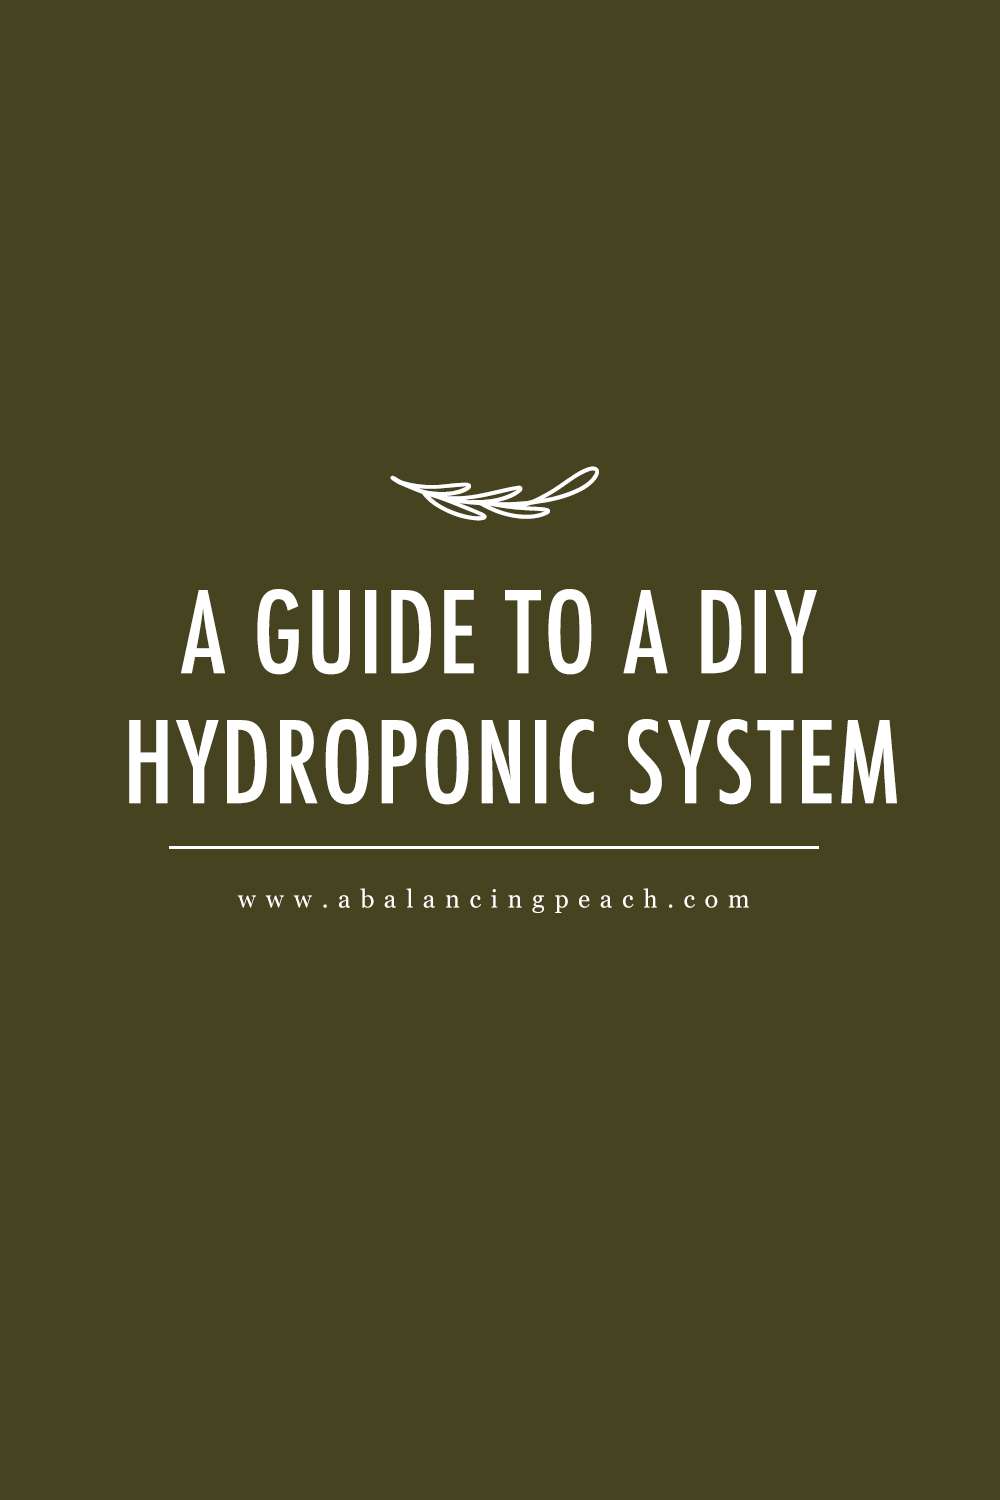 A Guide To a DIY Hydroponic System